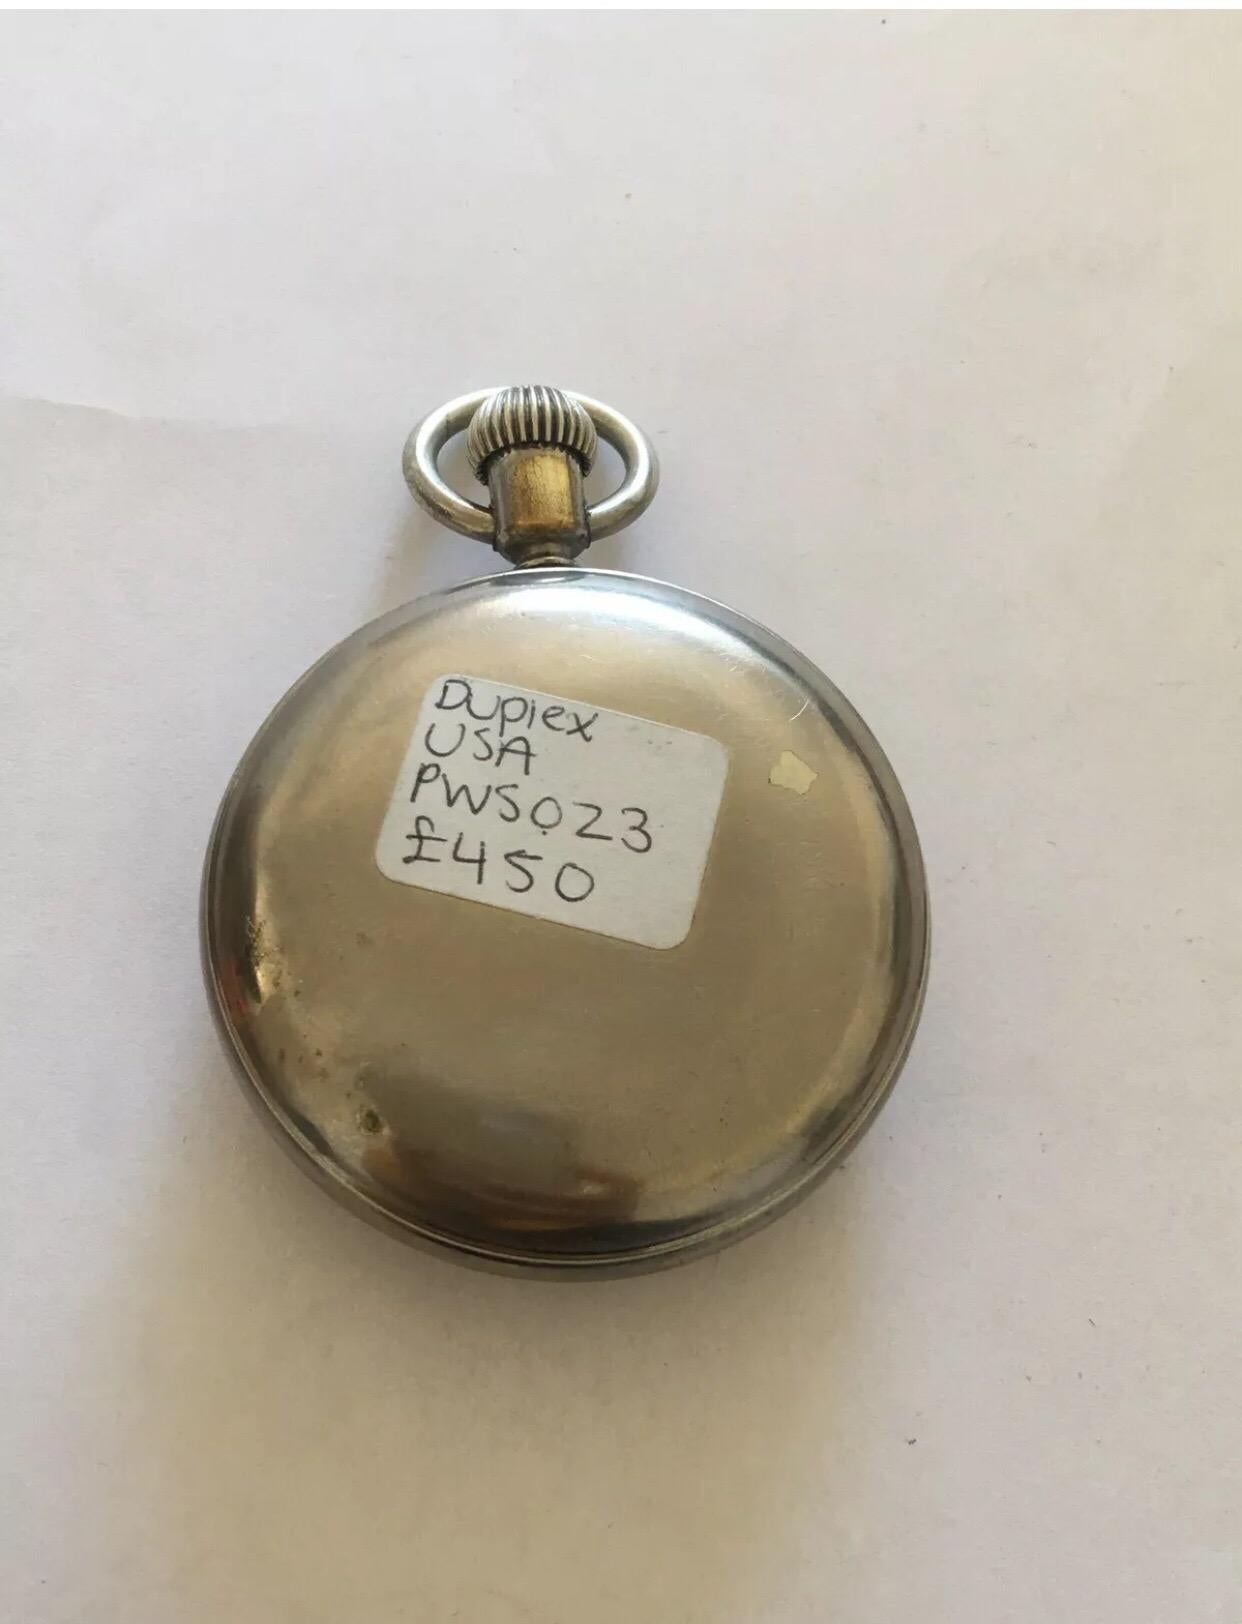 Antique Duplex Pocket Watch Signed Waterbury Watch Co.


This watch is working and ticking well however, I cannot guarantee the time accuracy.